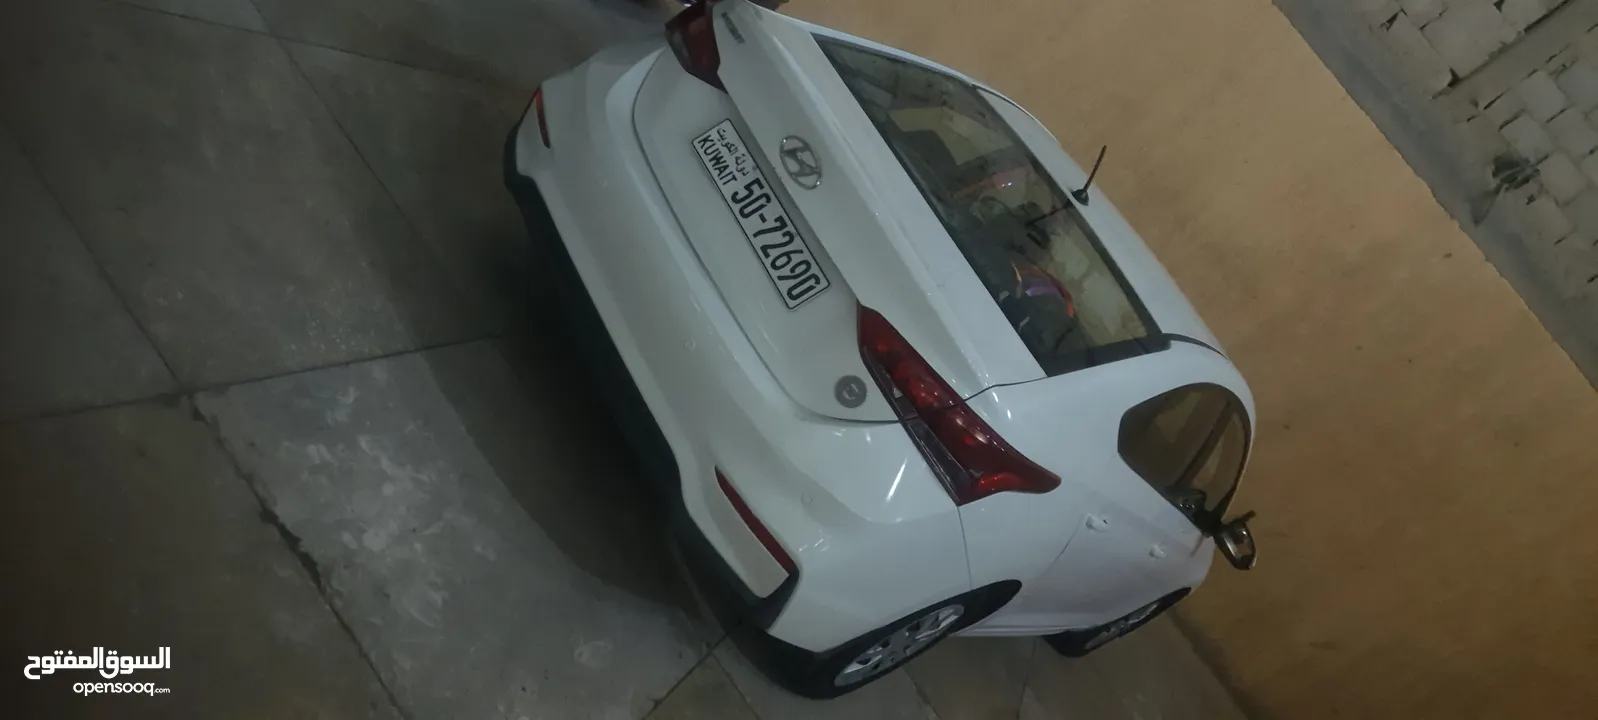 Excellent Hyundai Accent model 2019 with 1600cc with Engine gear chasis conditional pass 4 new tyres